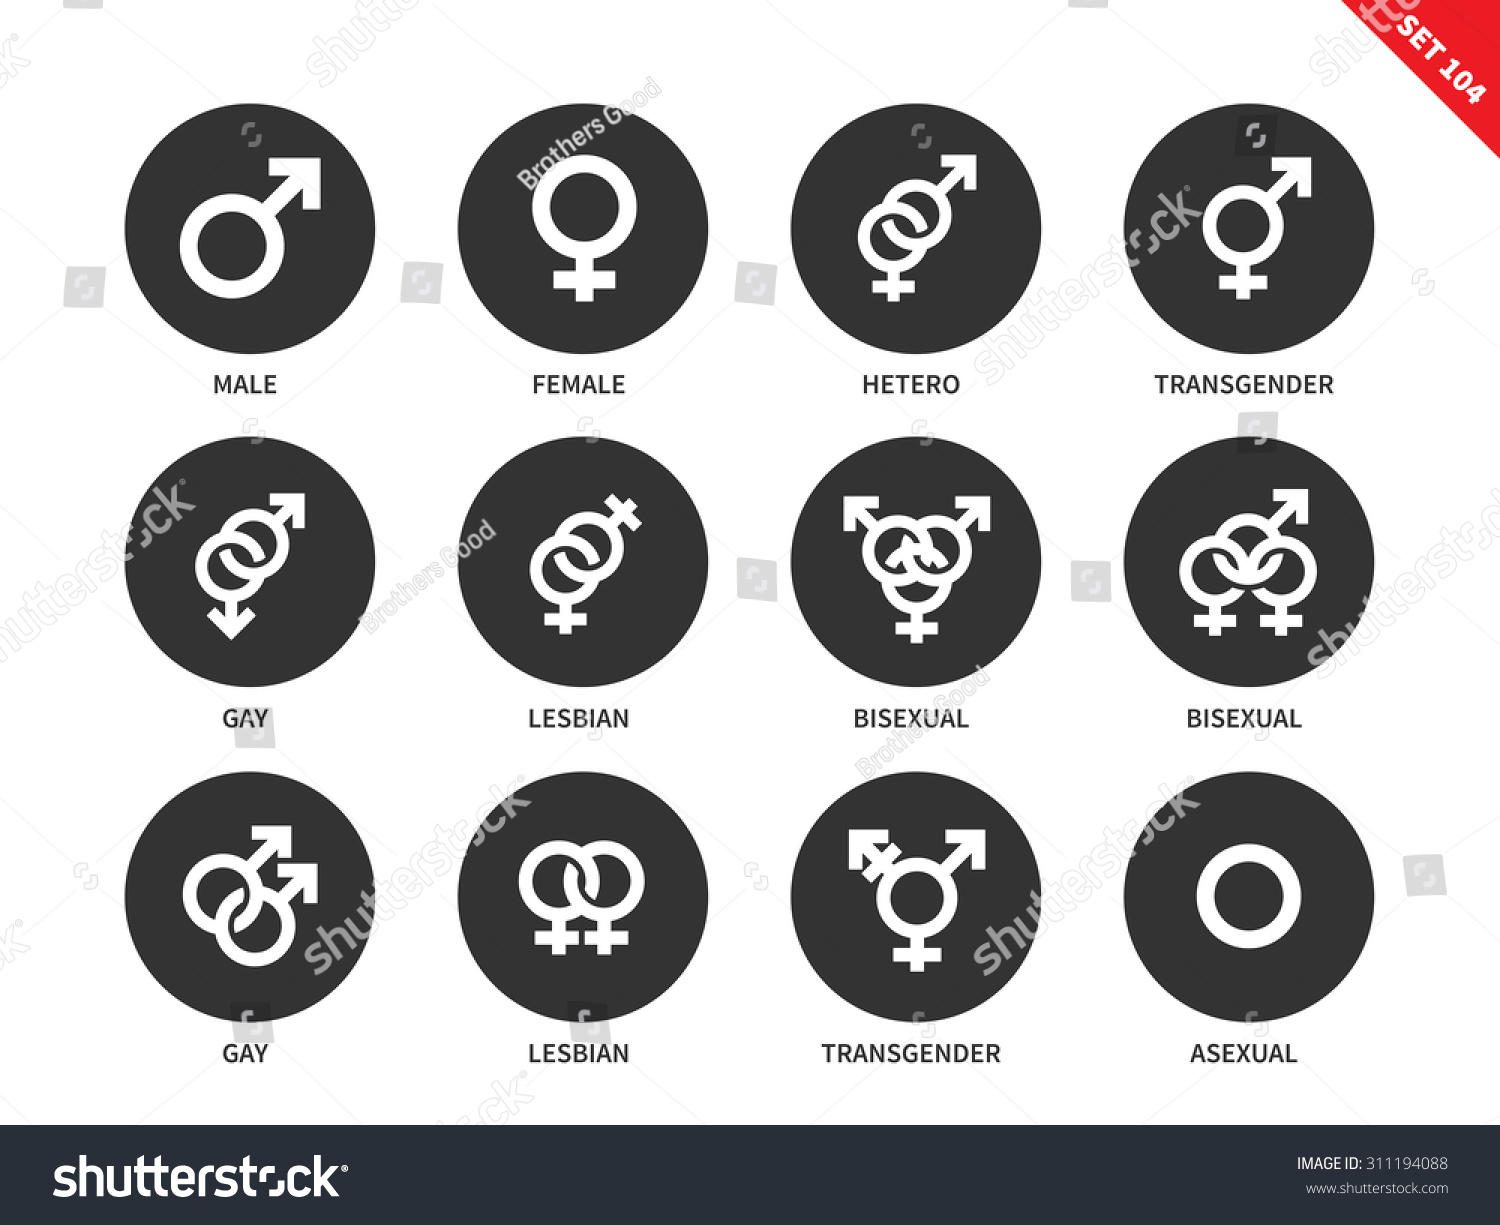 Sexual Orientation Vector Icons Set Gender And Sex Concept Items For